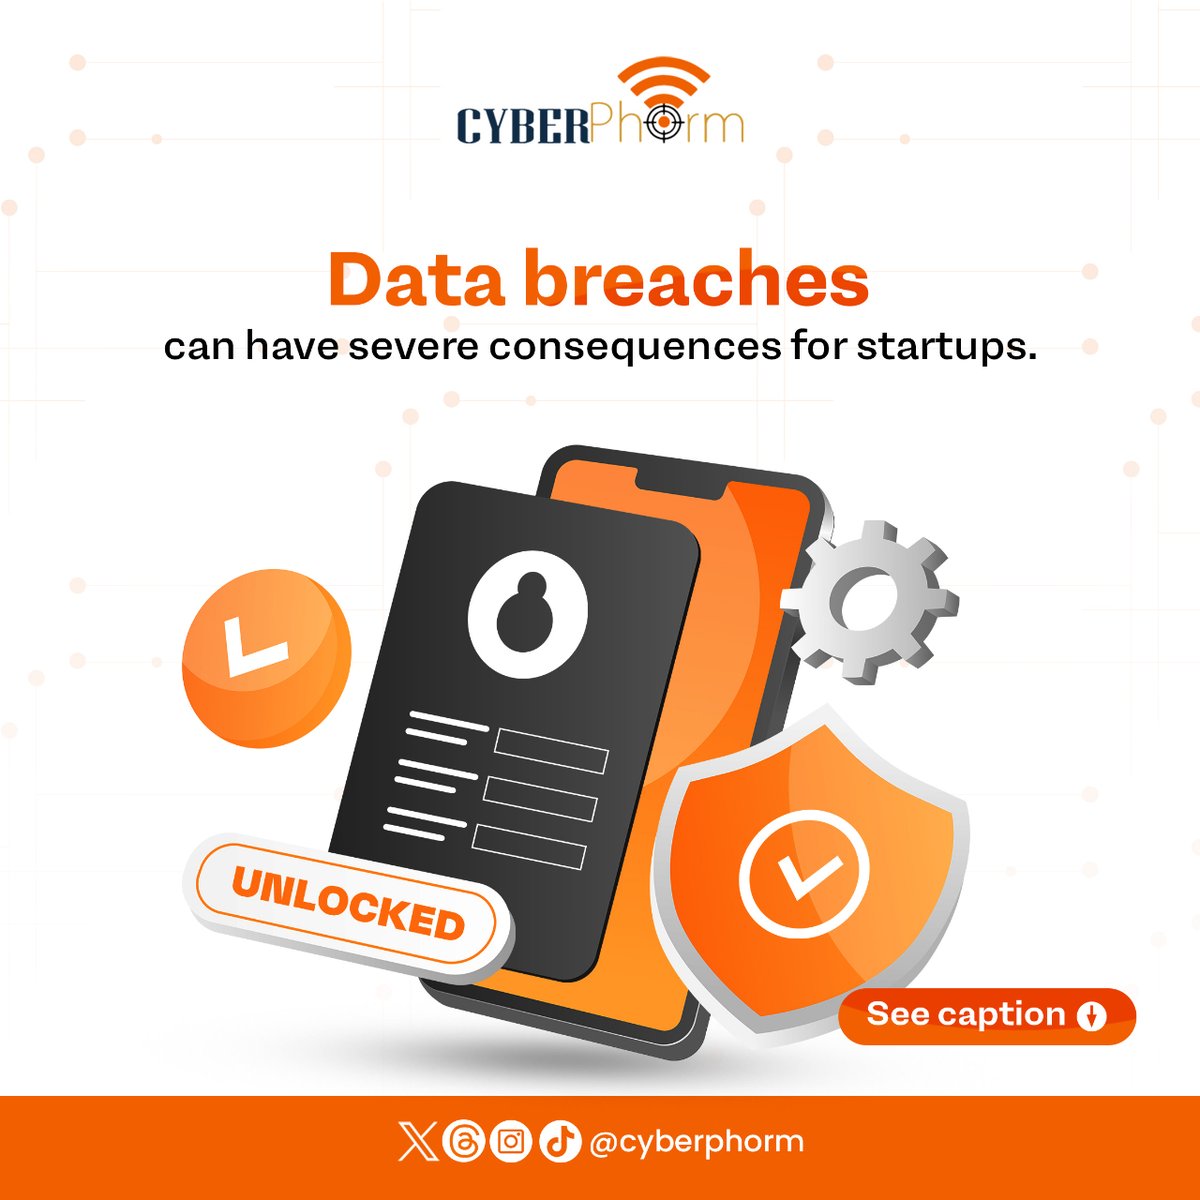 Data breaches pose a significant threat to startups, potentially leading to dire consequences. They damage trust reputation, lead to hefty financial losses, legal liabilities, & regulatory fines.

Want to protect your business?
Click the link in bio

#DataSecurity #StartupSuccess